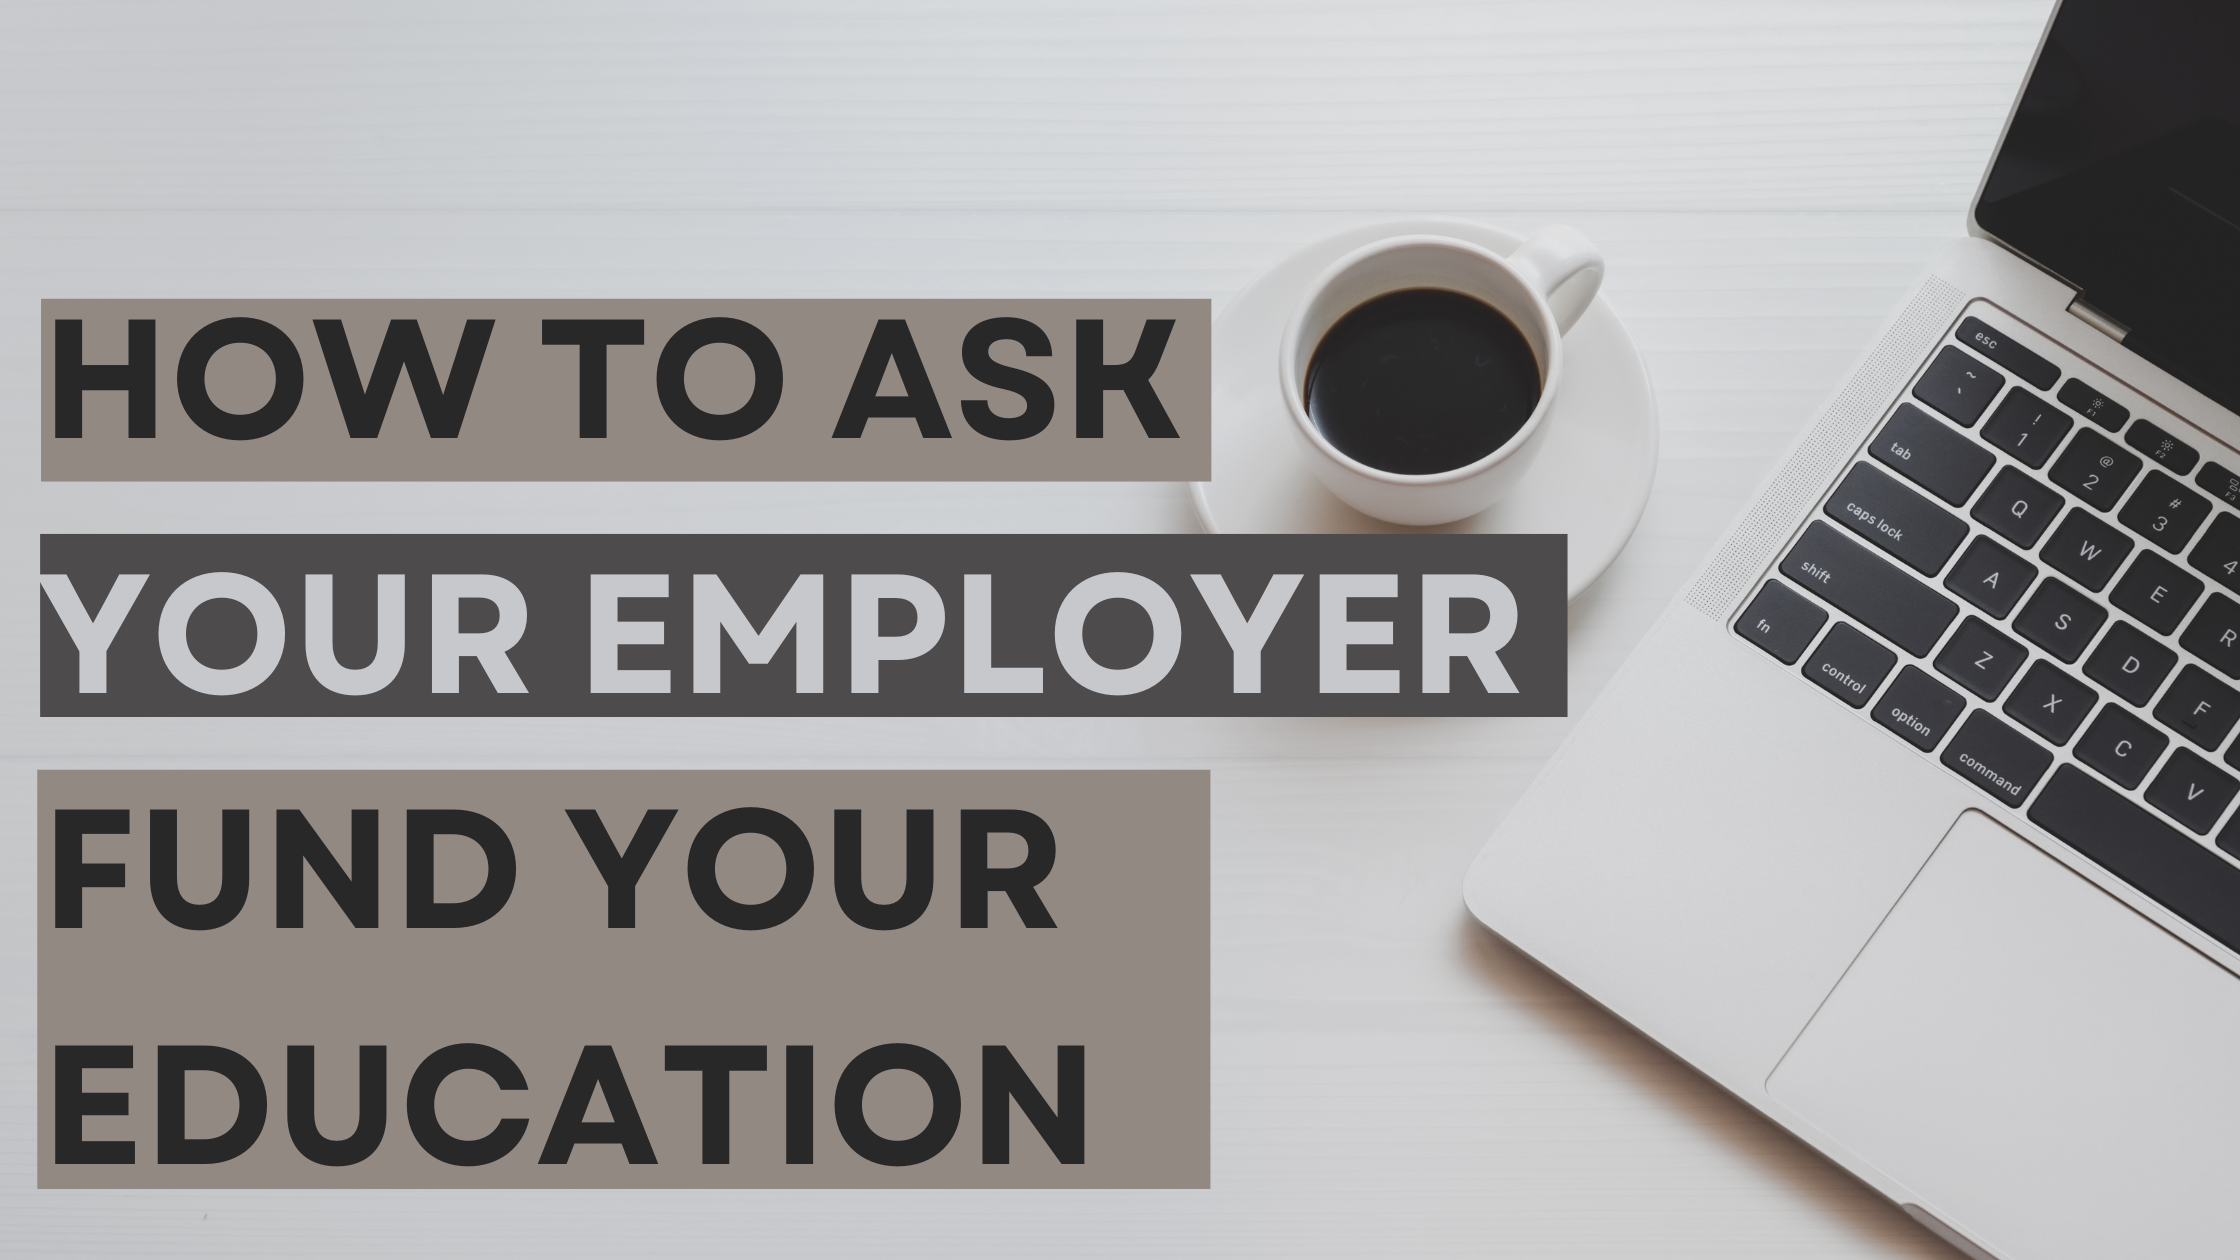 How to Ask Your Employer to Fund Your Education